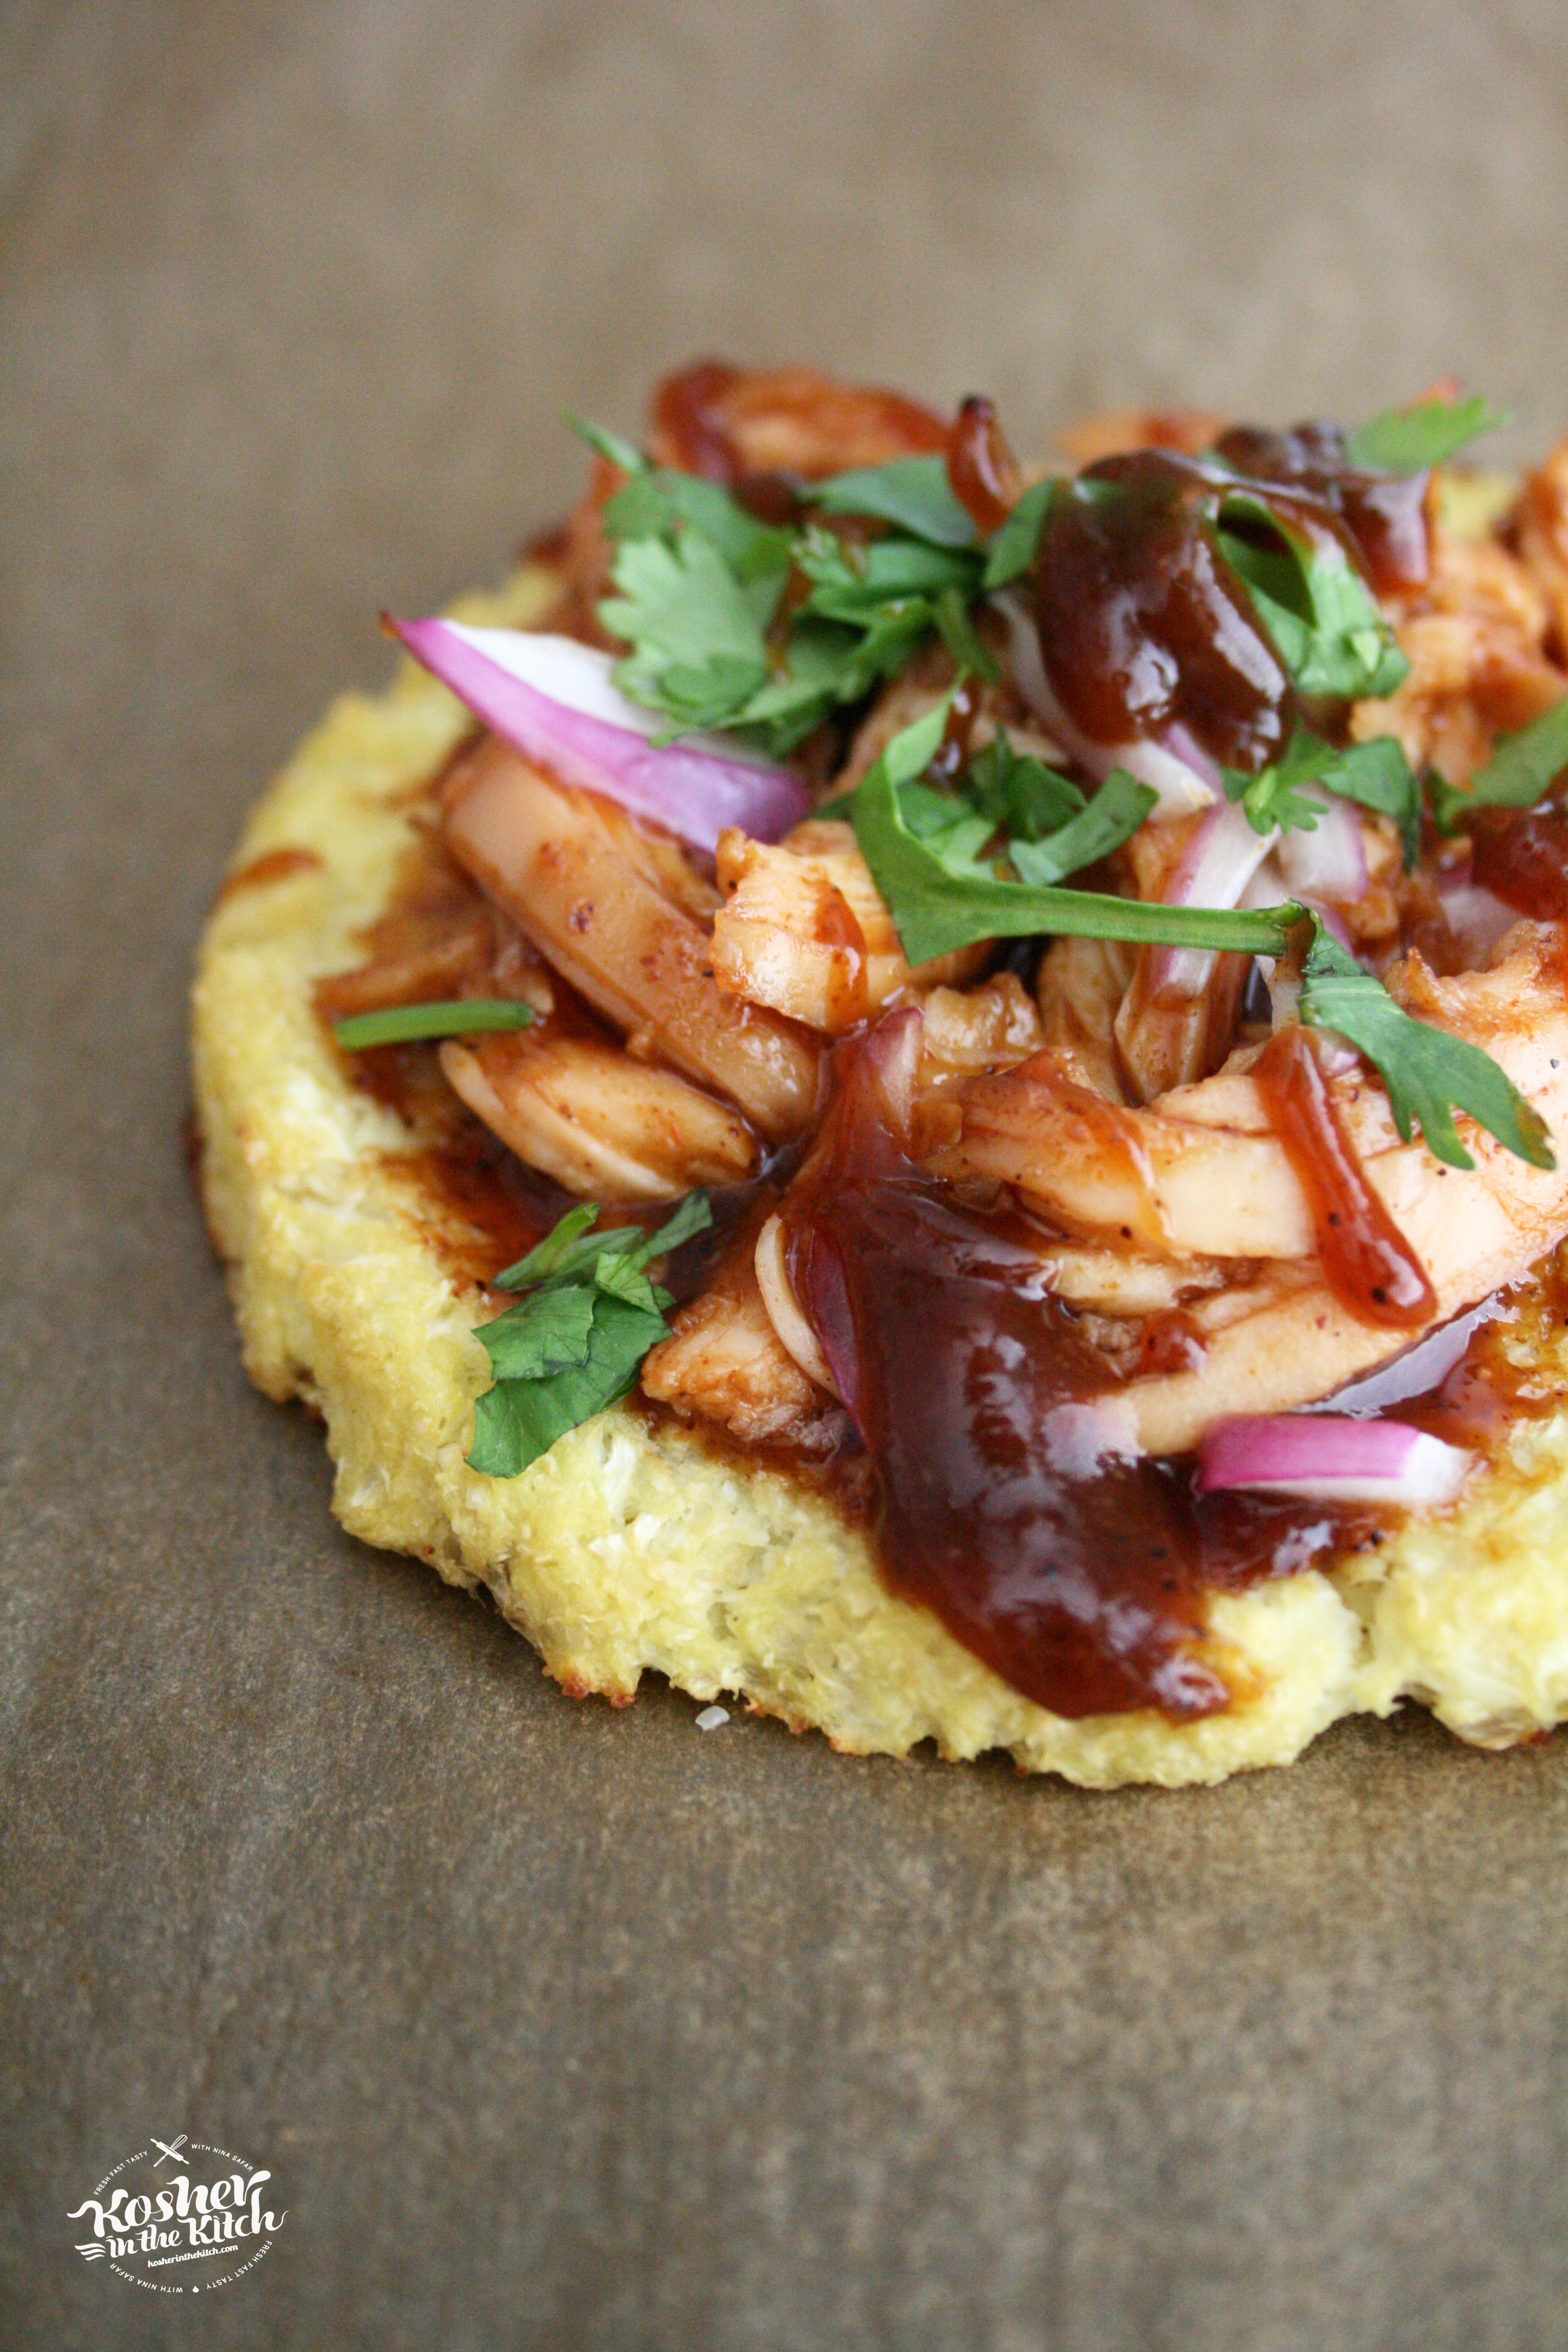 Cook cauliflower pizza with toppings then top with additional bbq sauce